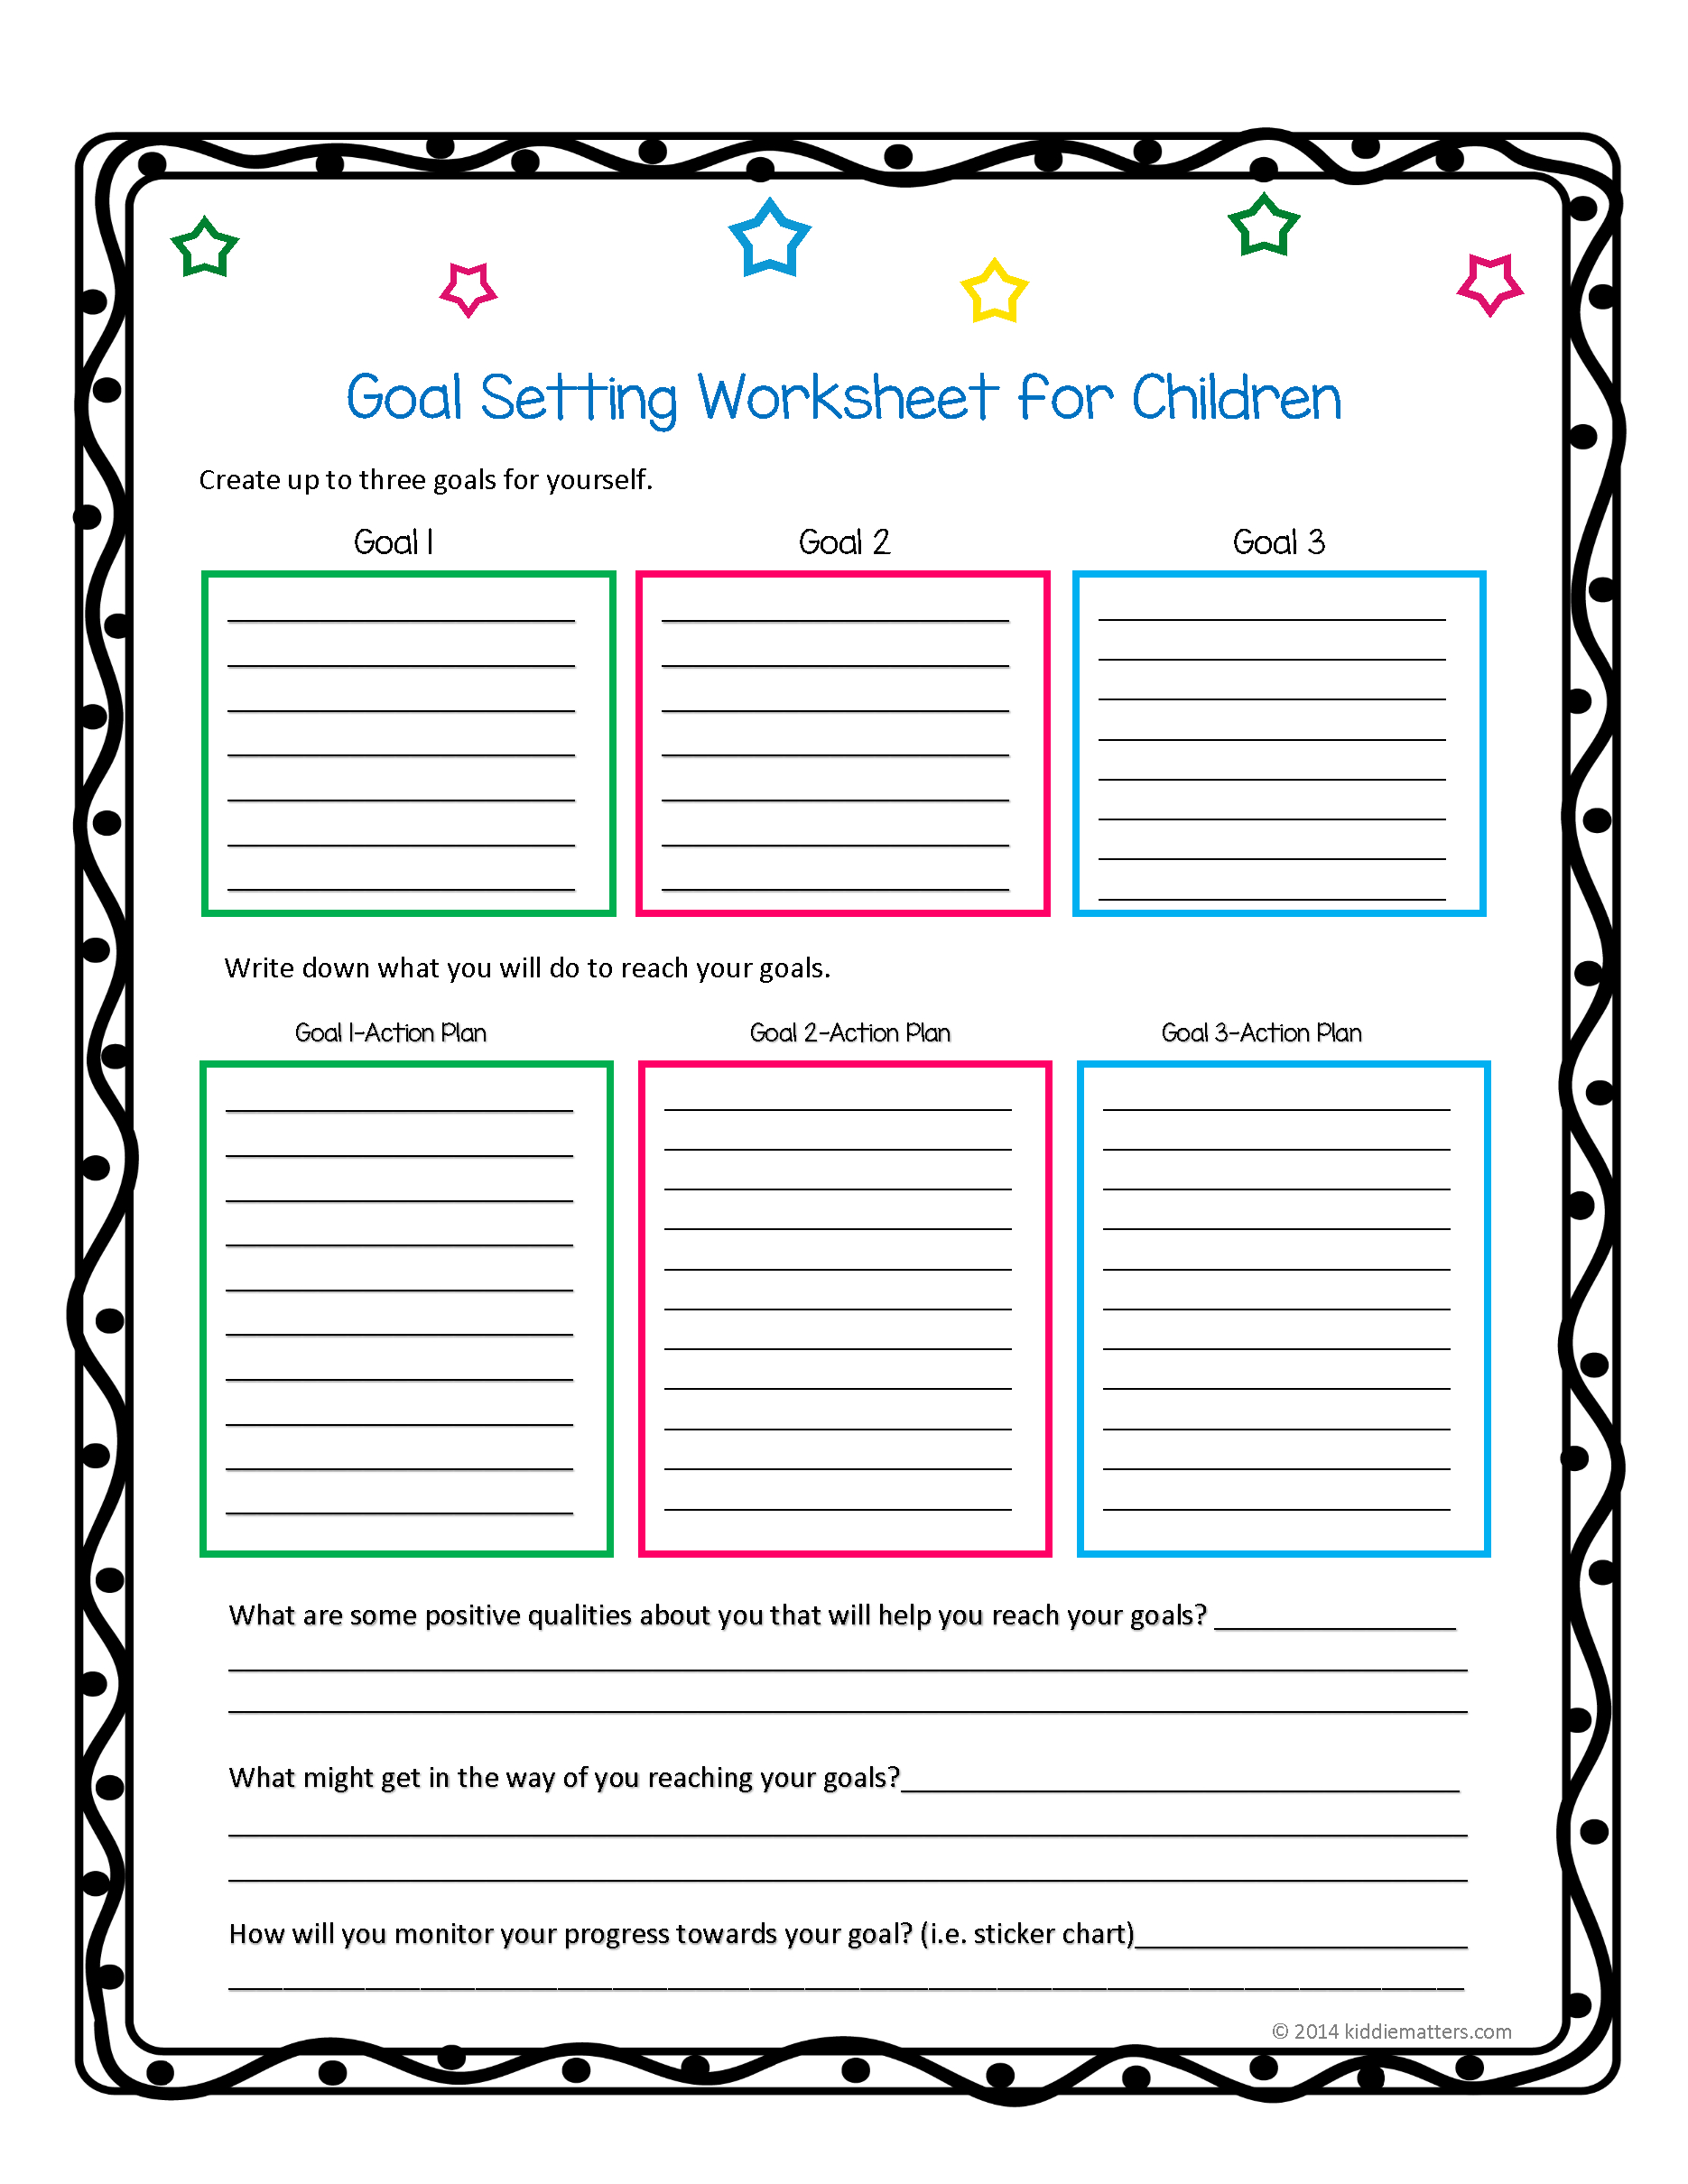 This Worksheet And Free Printable Helps Children Learn How To Set | Printable Goal Setting Worksheet For High School Students